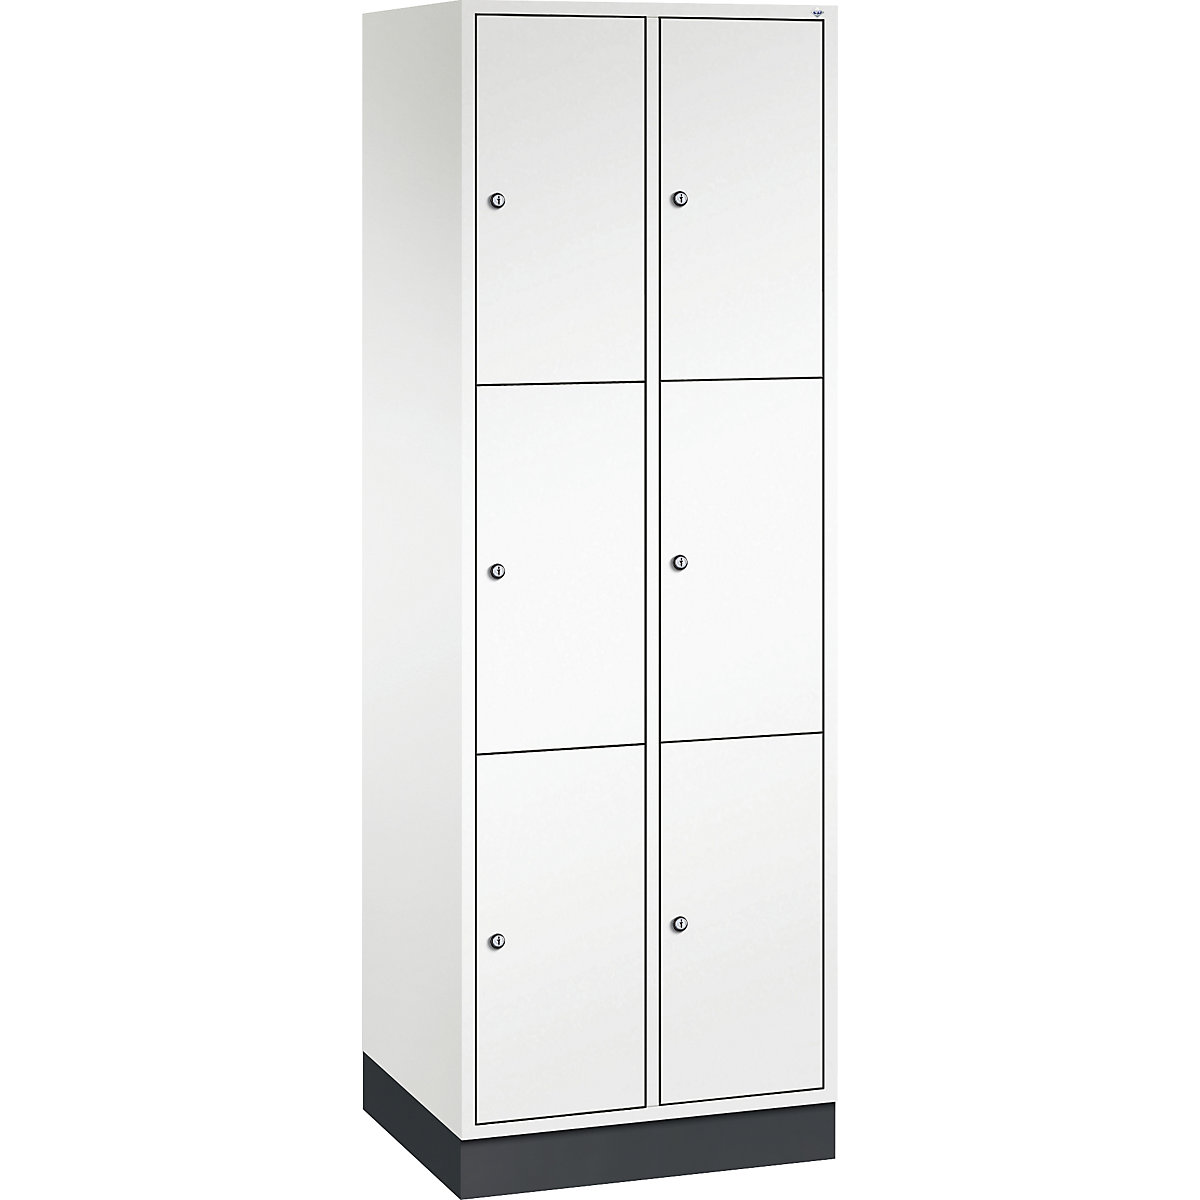 INTRO steel compartment locker, compartment height 580 mm – C+P, WxD 620 x 500 mm, 6 compartments, pure white body, pure white doors